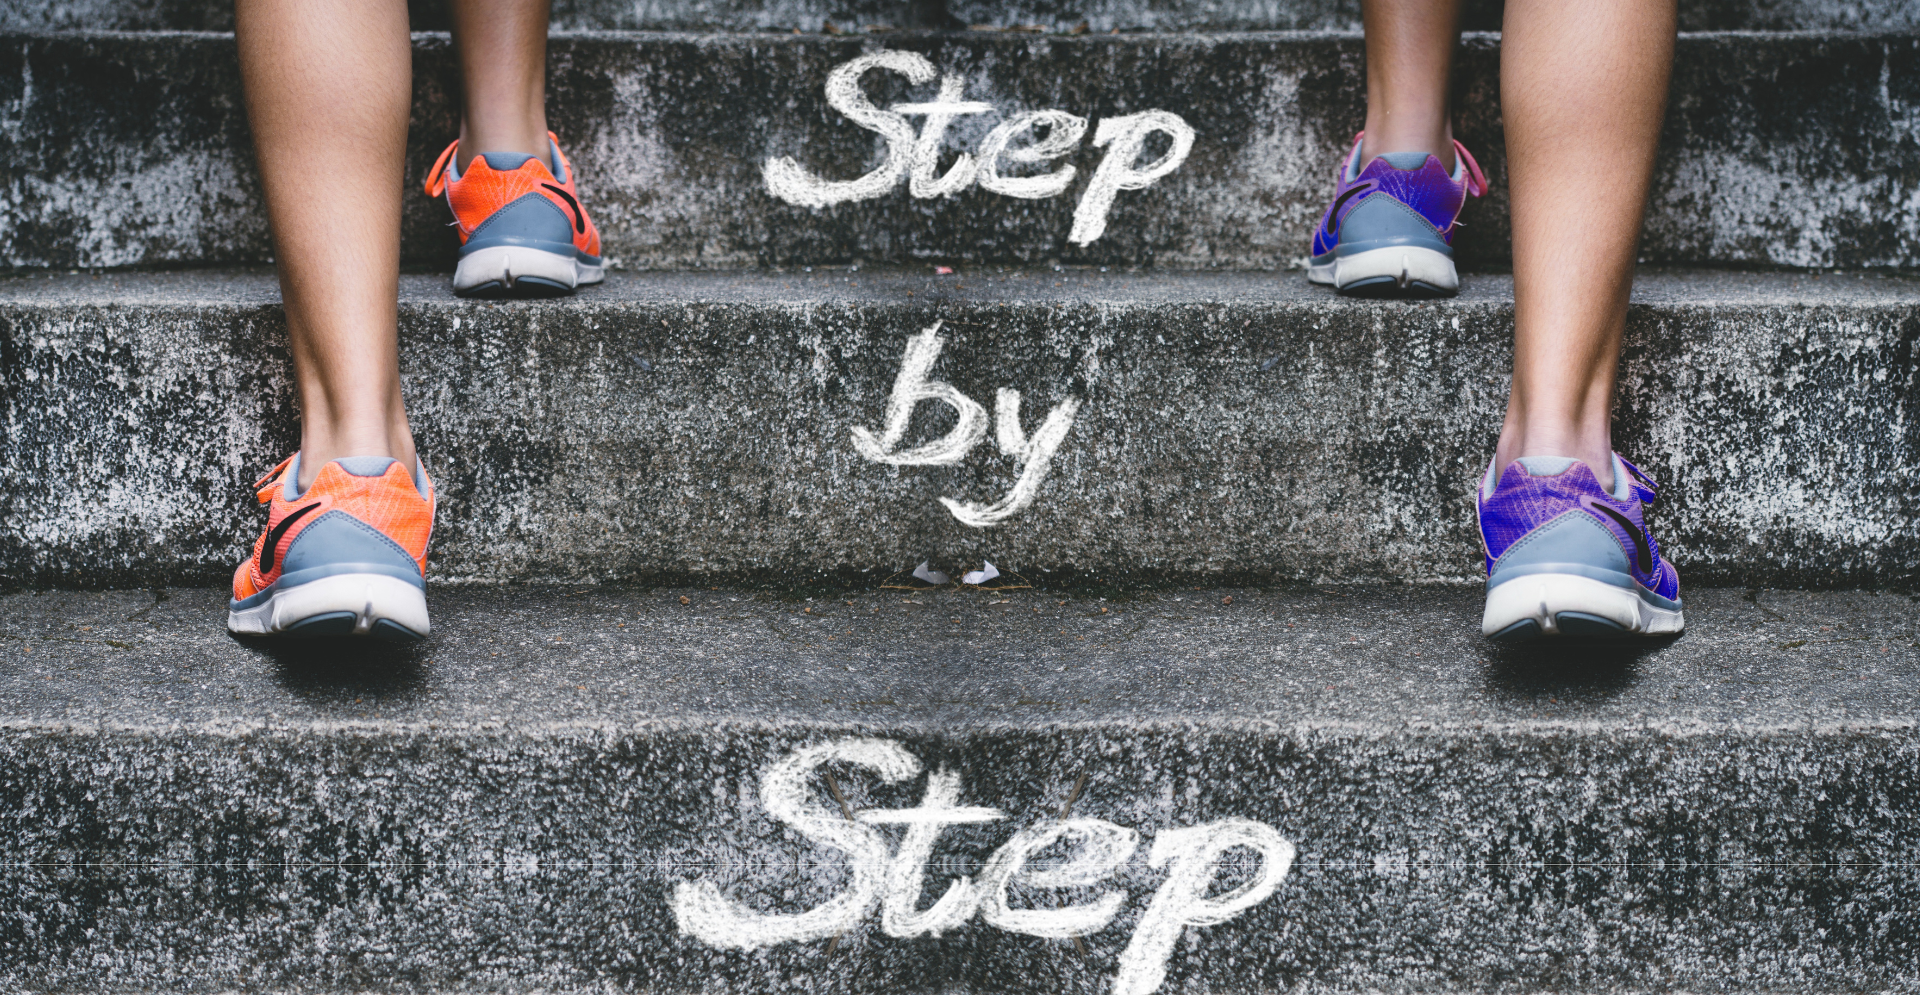 Stair Walking May Improve Insulin Resistance